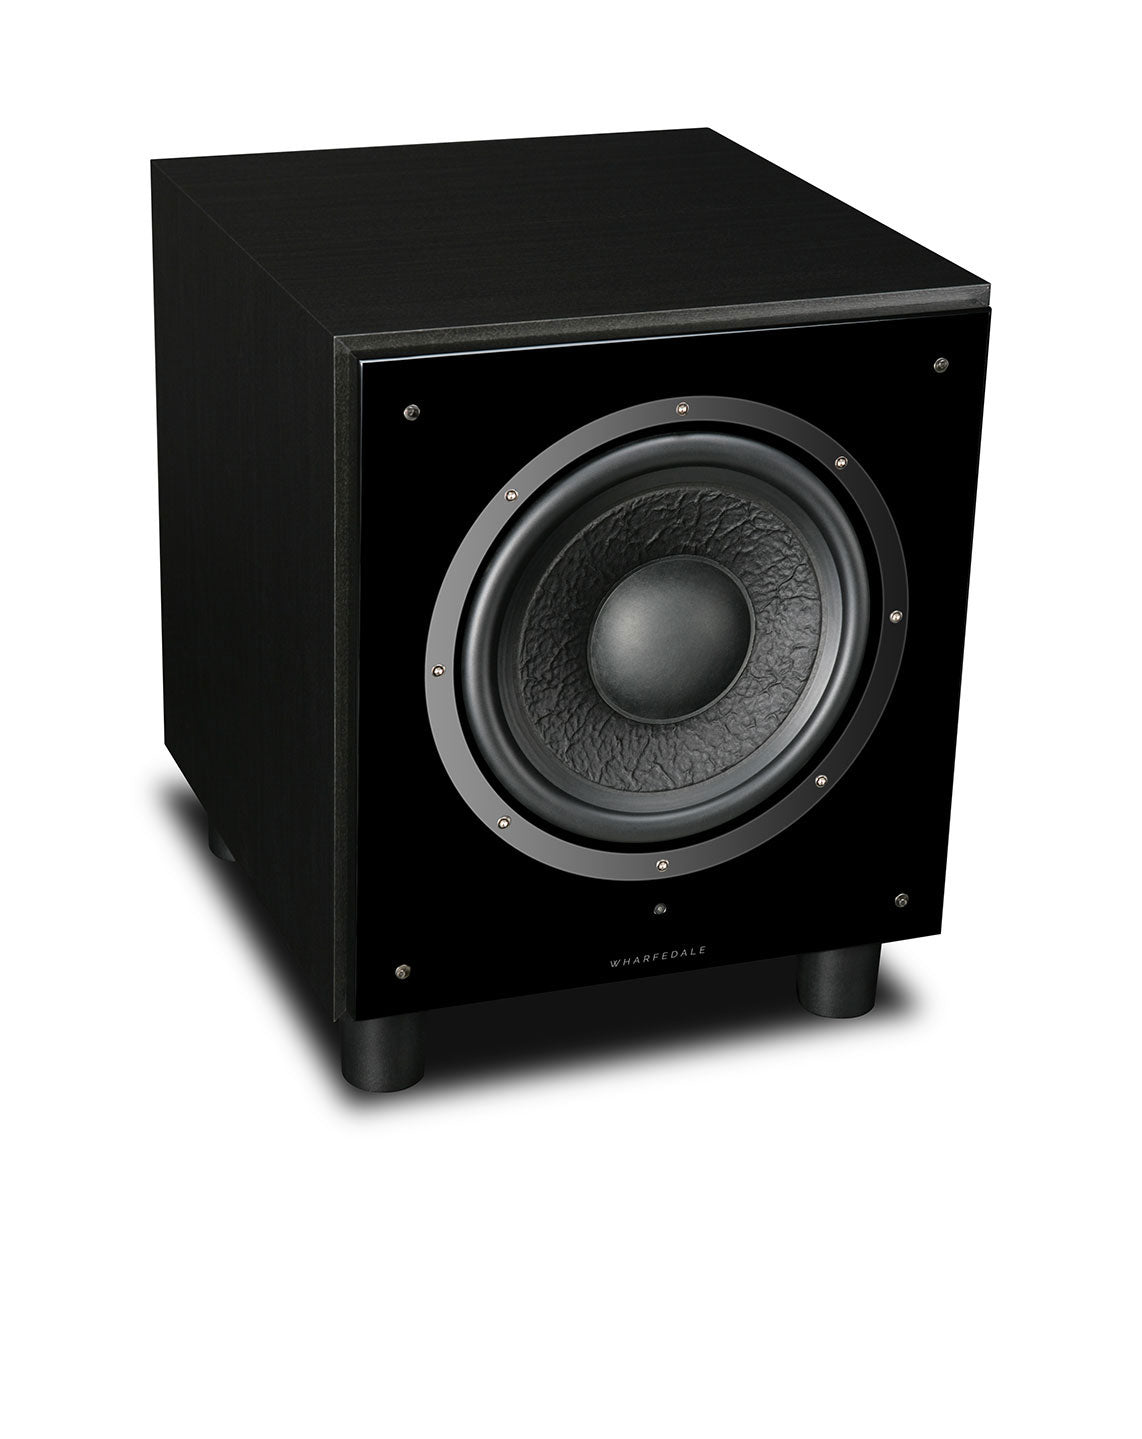 The SW series of subwoofers offer a level of performance previously unheard of in their class. Revolutionary drive units, amplifier modules and filter stages feature on every model. They strike the perfect balance between power and sound quality, offering remarkable sound pressure levels